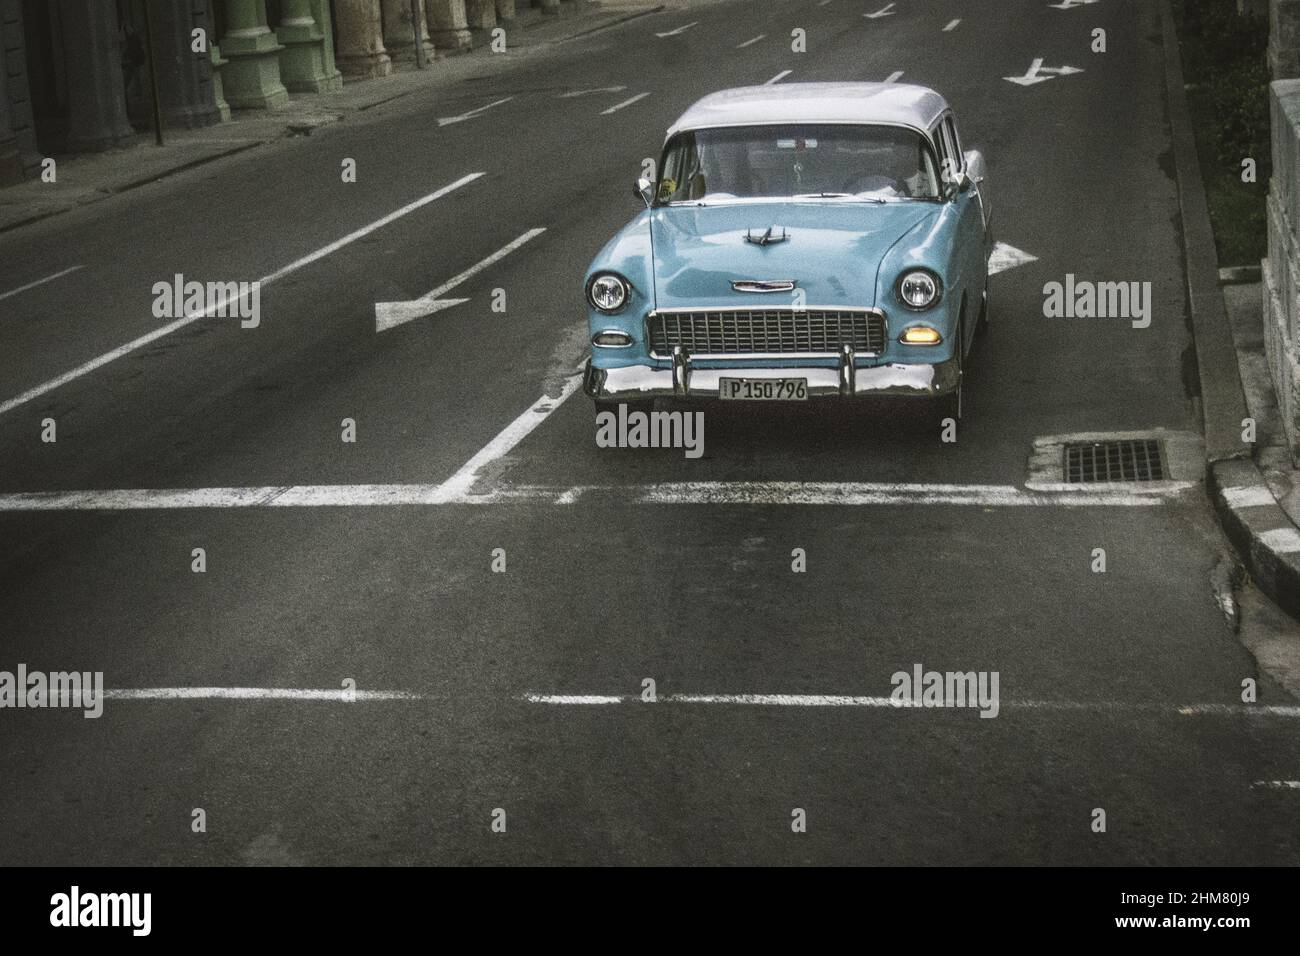 Original and beautiful Chevrolet Belair in the street Stock Photo